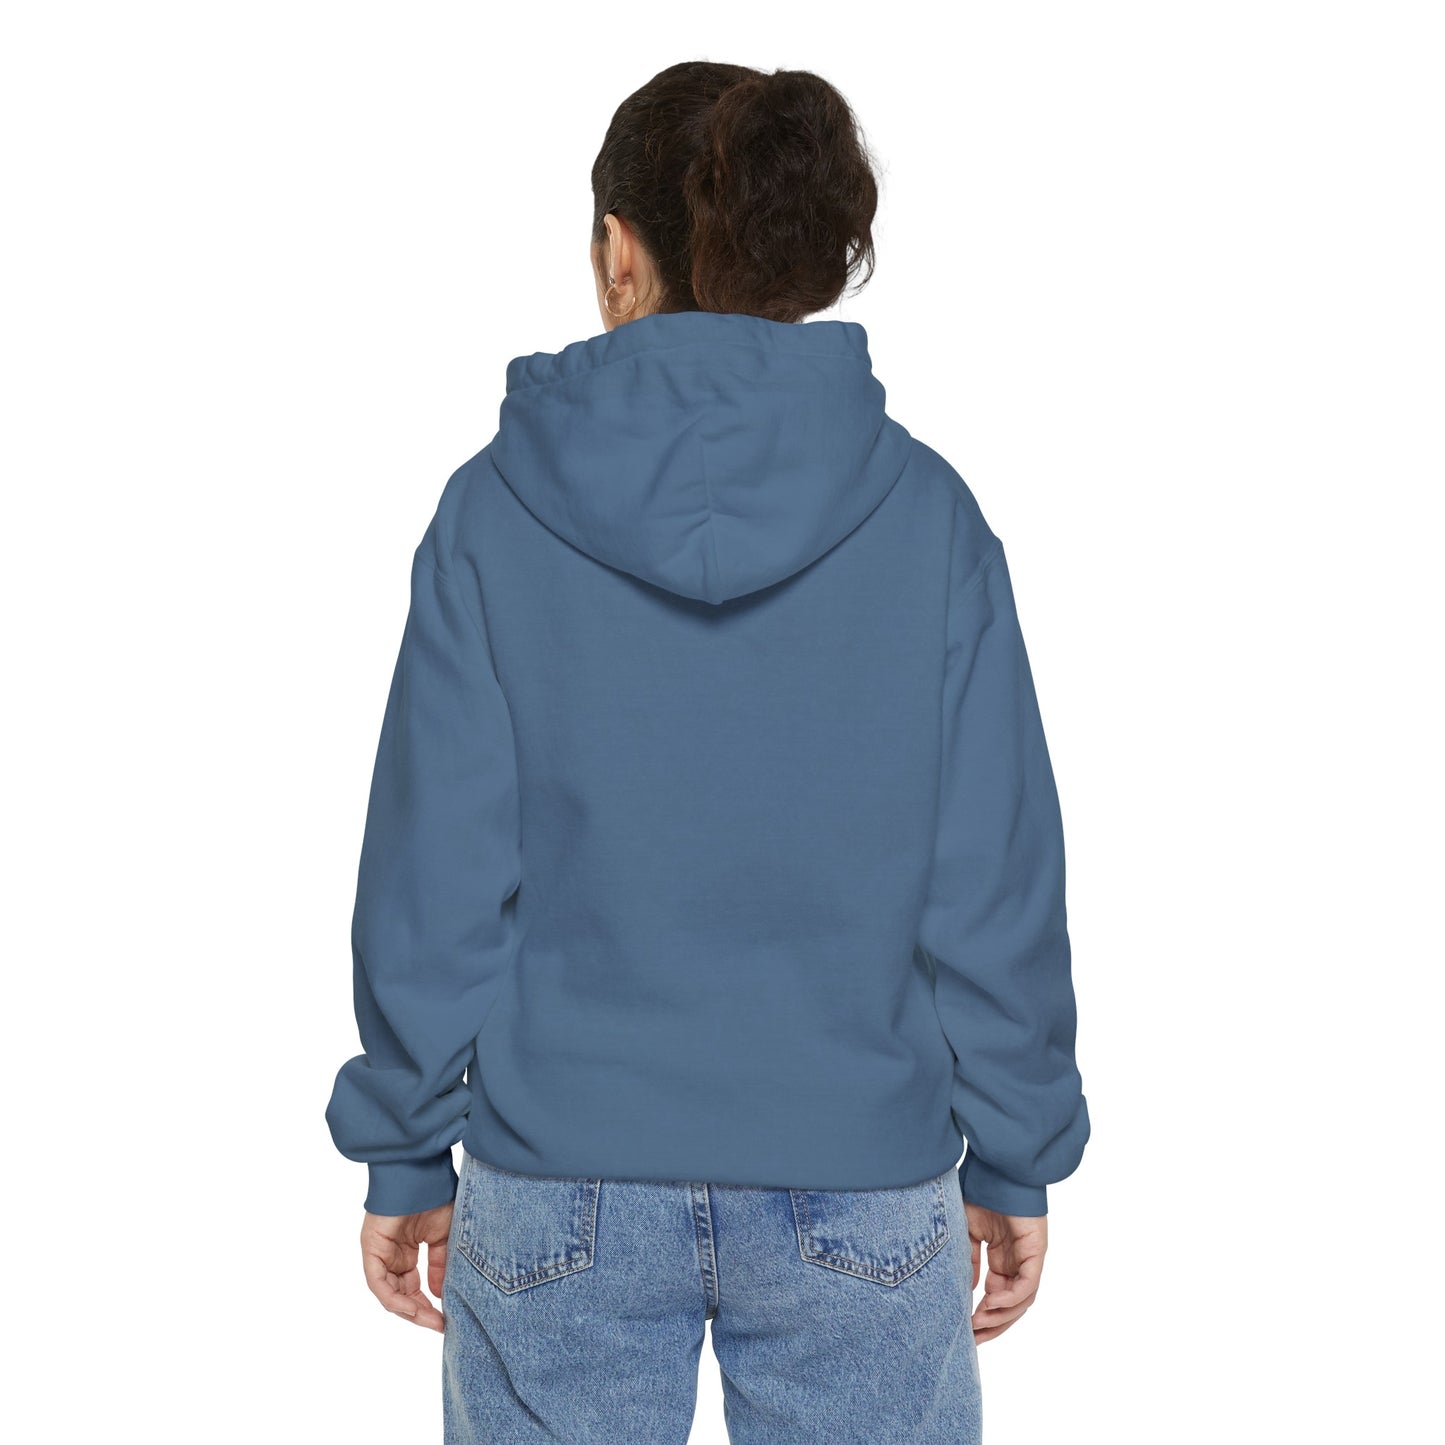 Emotional Support Weights Unisex Garment-Dyed Hoodie